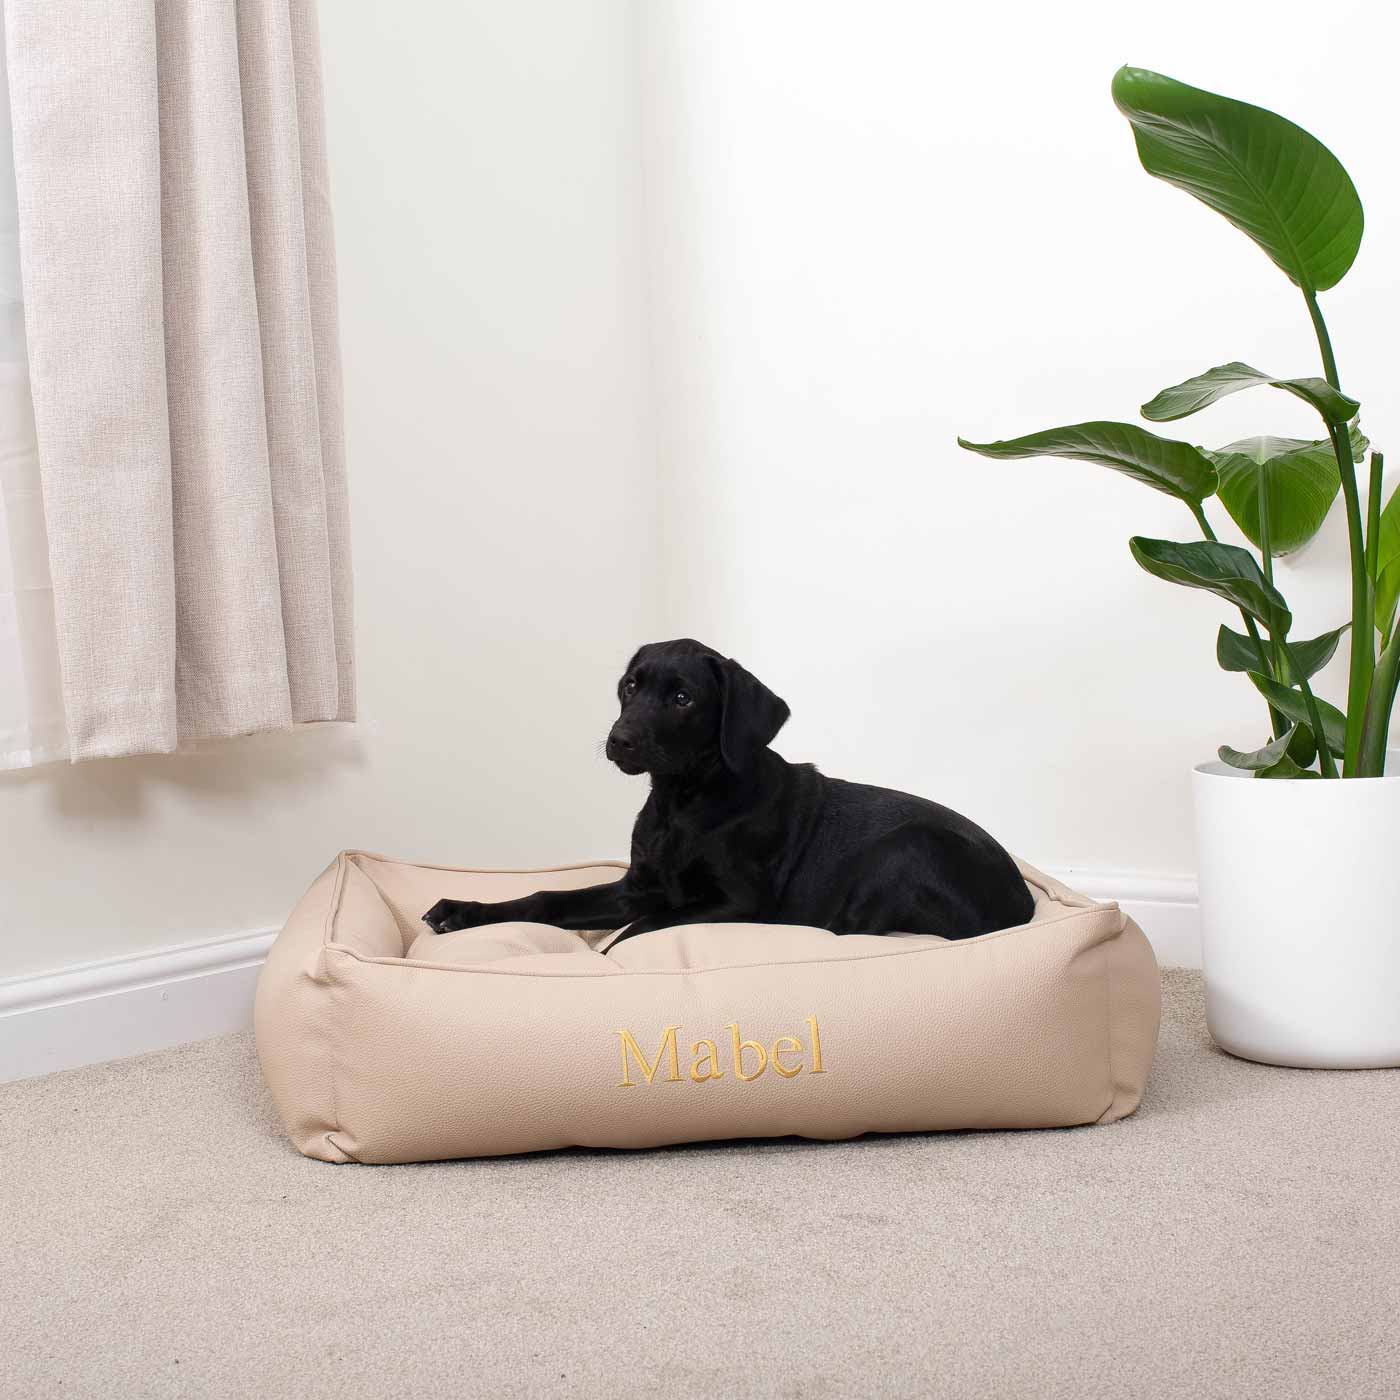 Luxury Handmade Box Bed in Rhino Tough Desert Faux Leather, in Sand, Perfect For Your Pets Nap Time! Available To Personalize at Lords & Labradors US